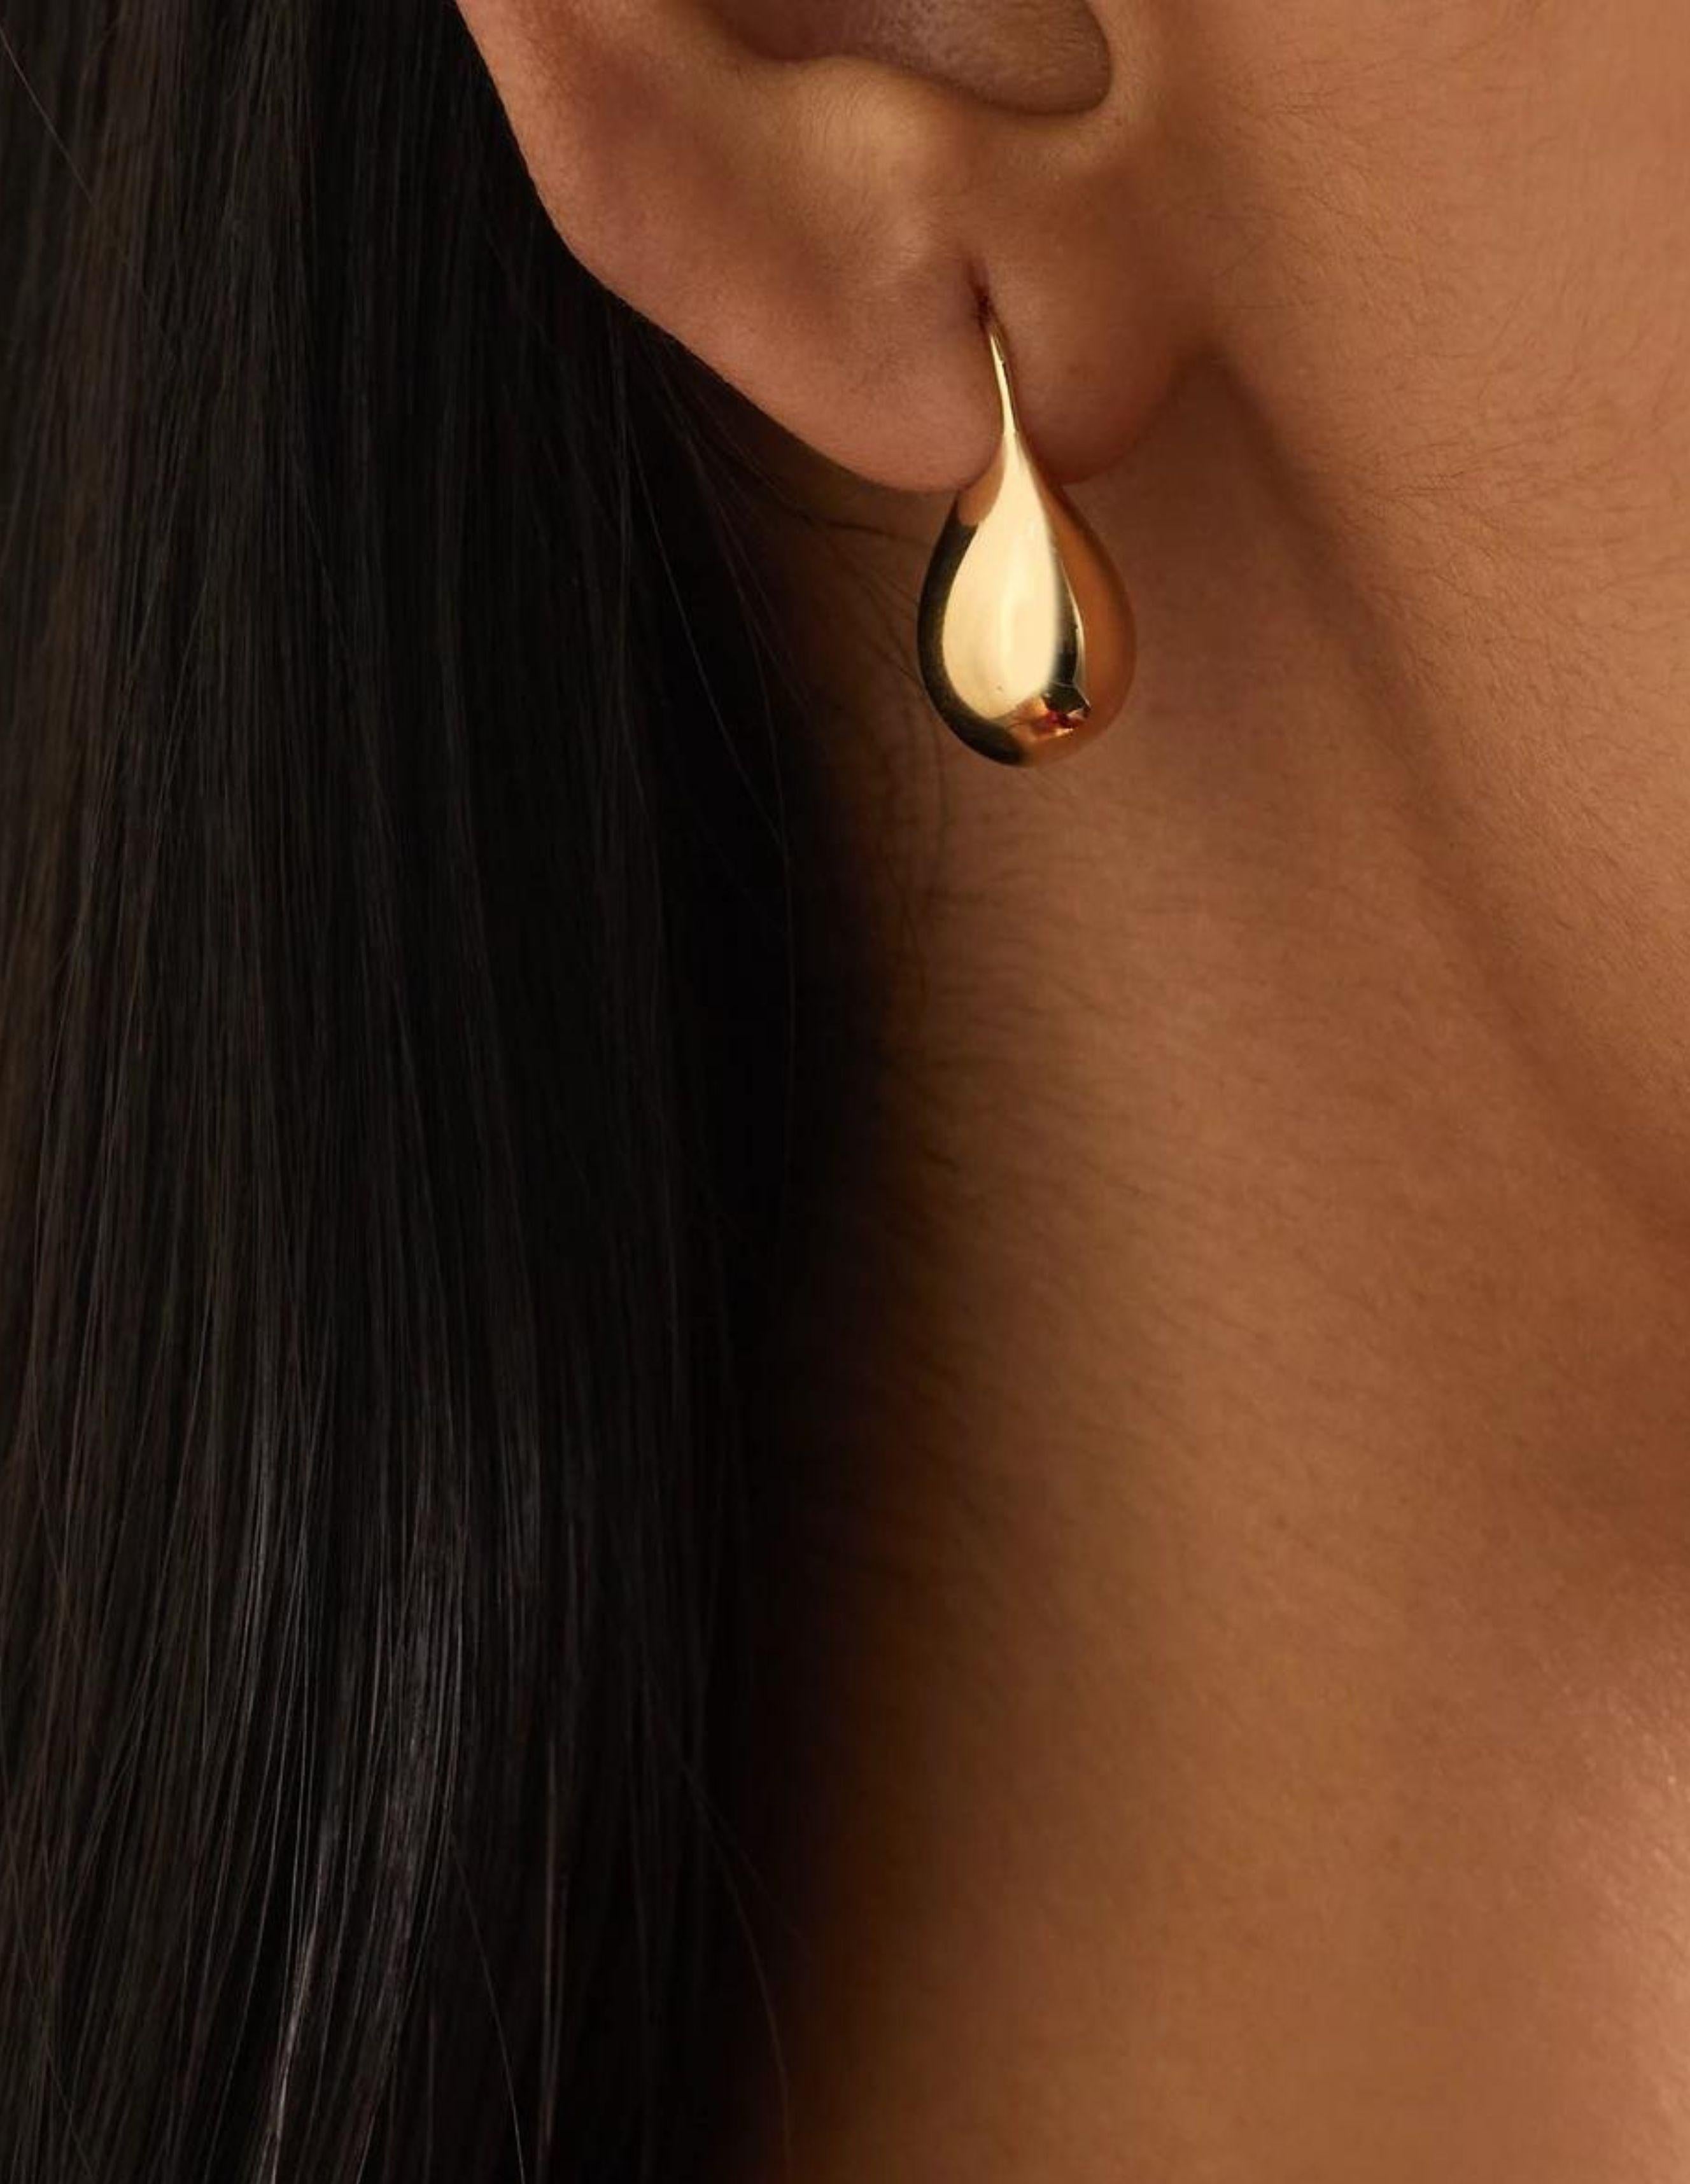 18K Gold drop earrings inspired by the shapes of water jugs and calf skin sacs, the objects that hold what we need for the journey. A vision of unspillable life. Polished and minimal with sculptural allure. 0.75 inch drop on hook fastening for